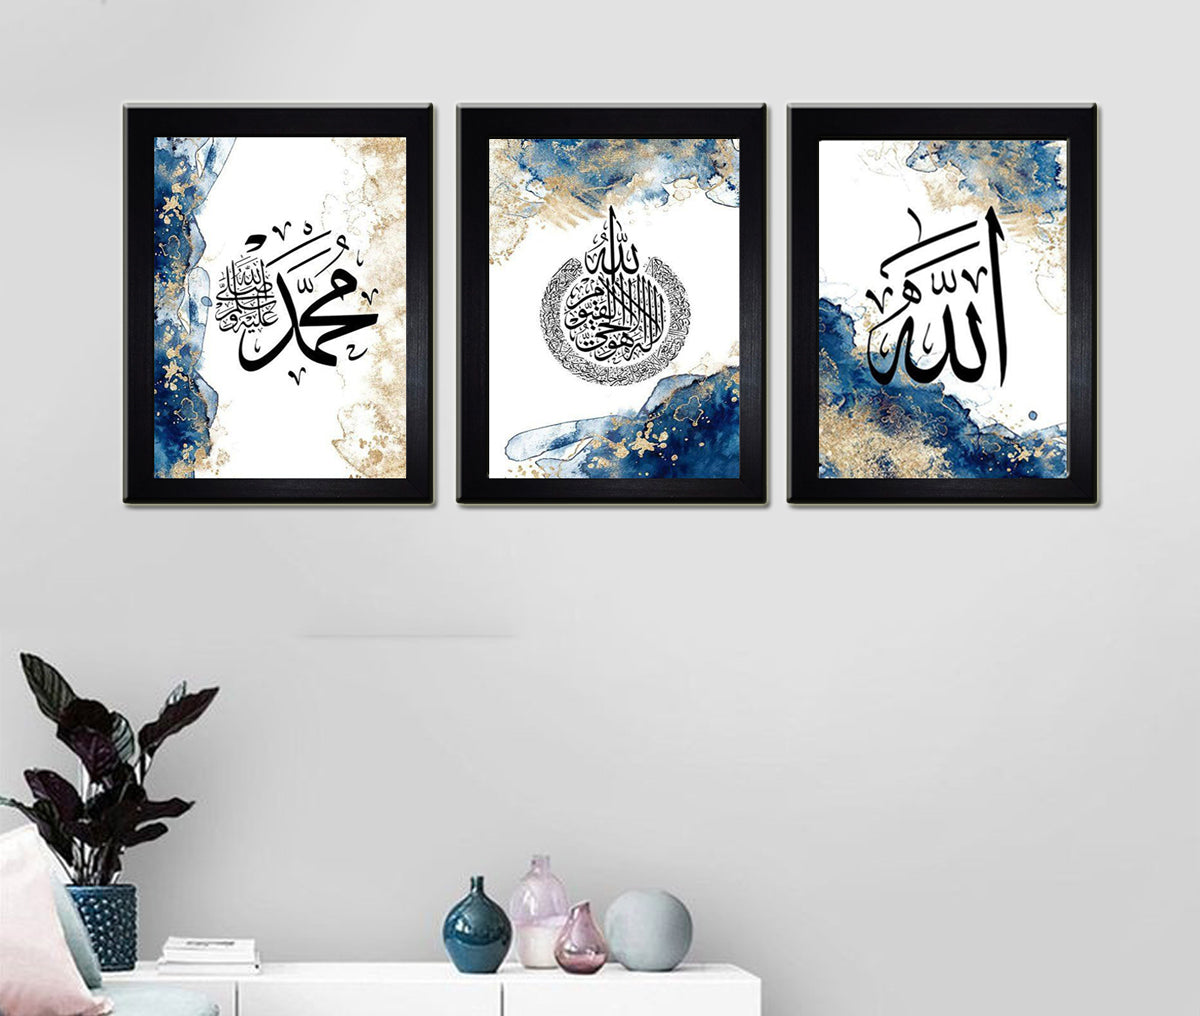 A Sleek and Modern Way to Add Some Islamic Decor to Your Home